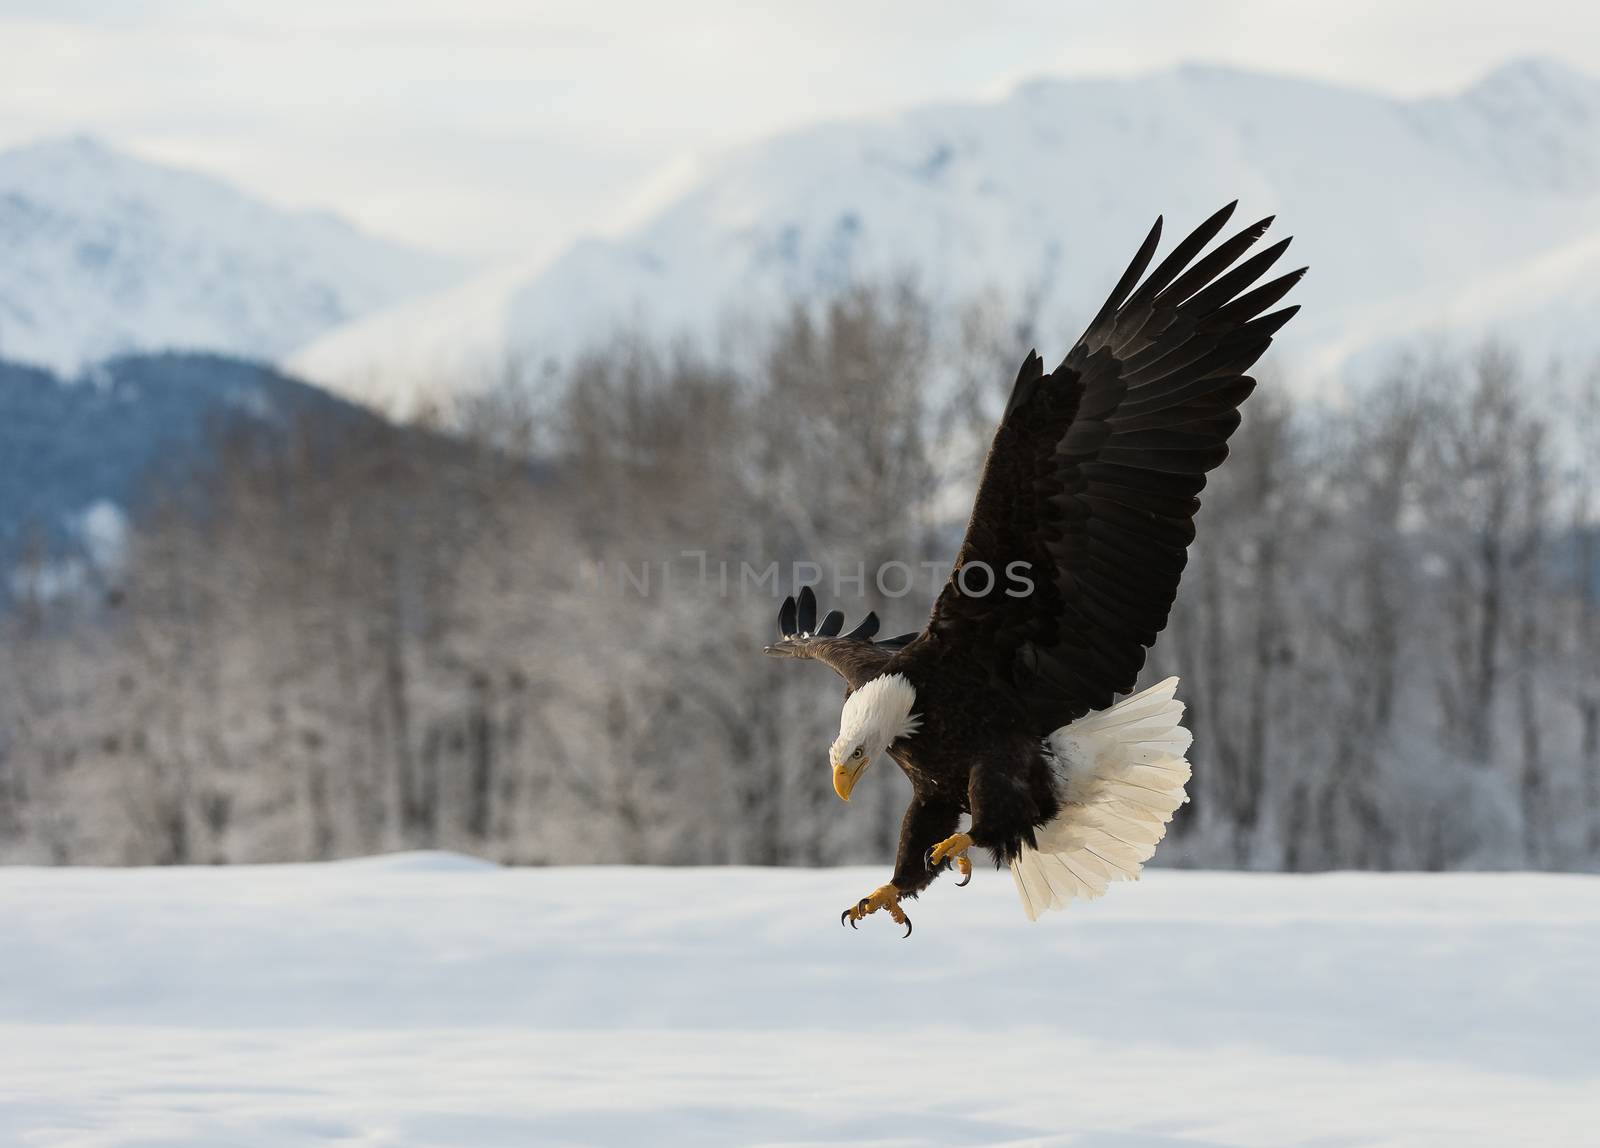 The Bald eagle lands on the snow-covered ground, having stretched wings